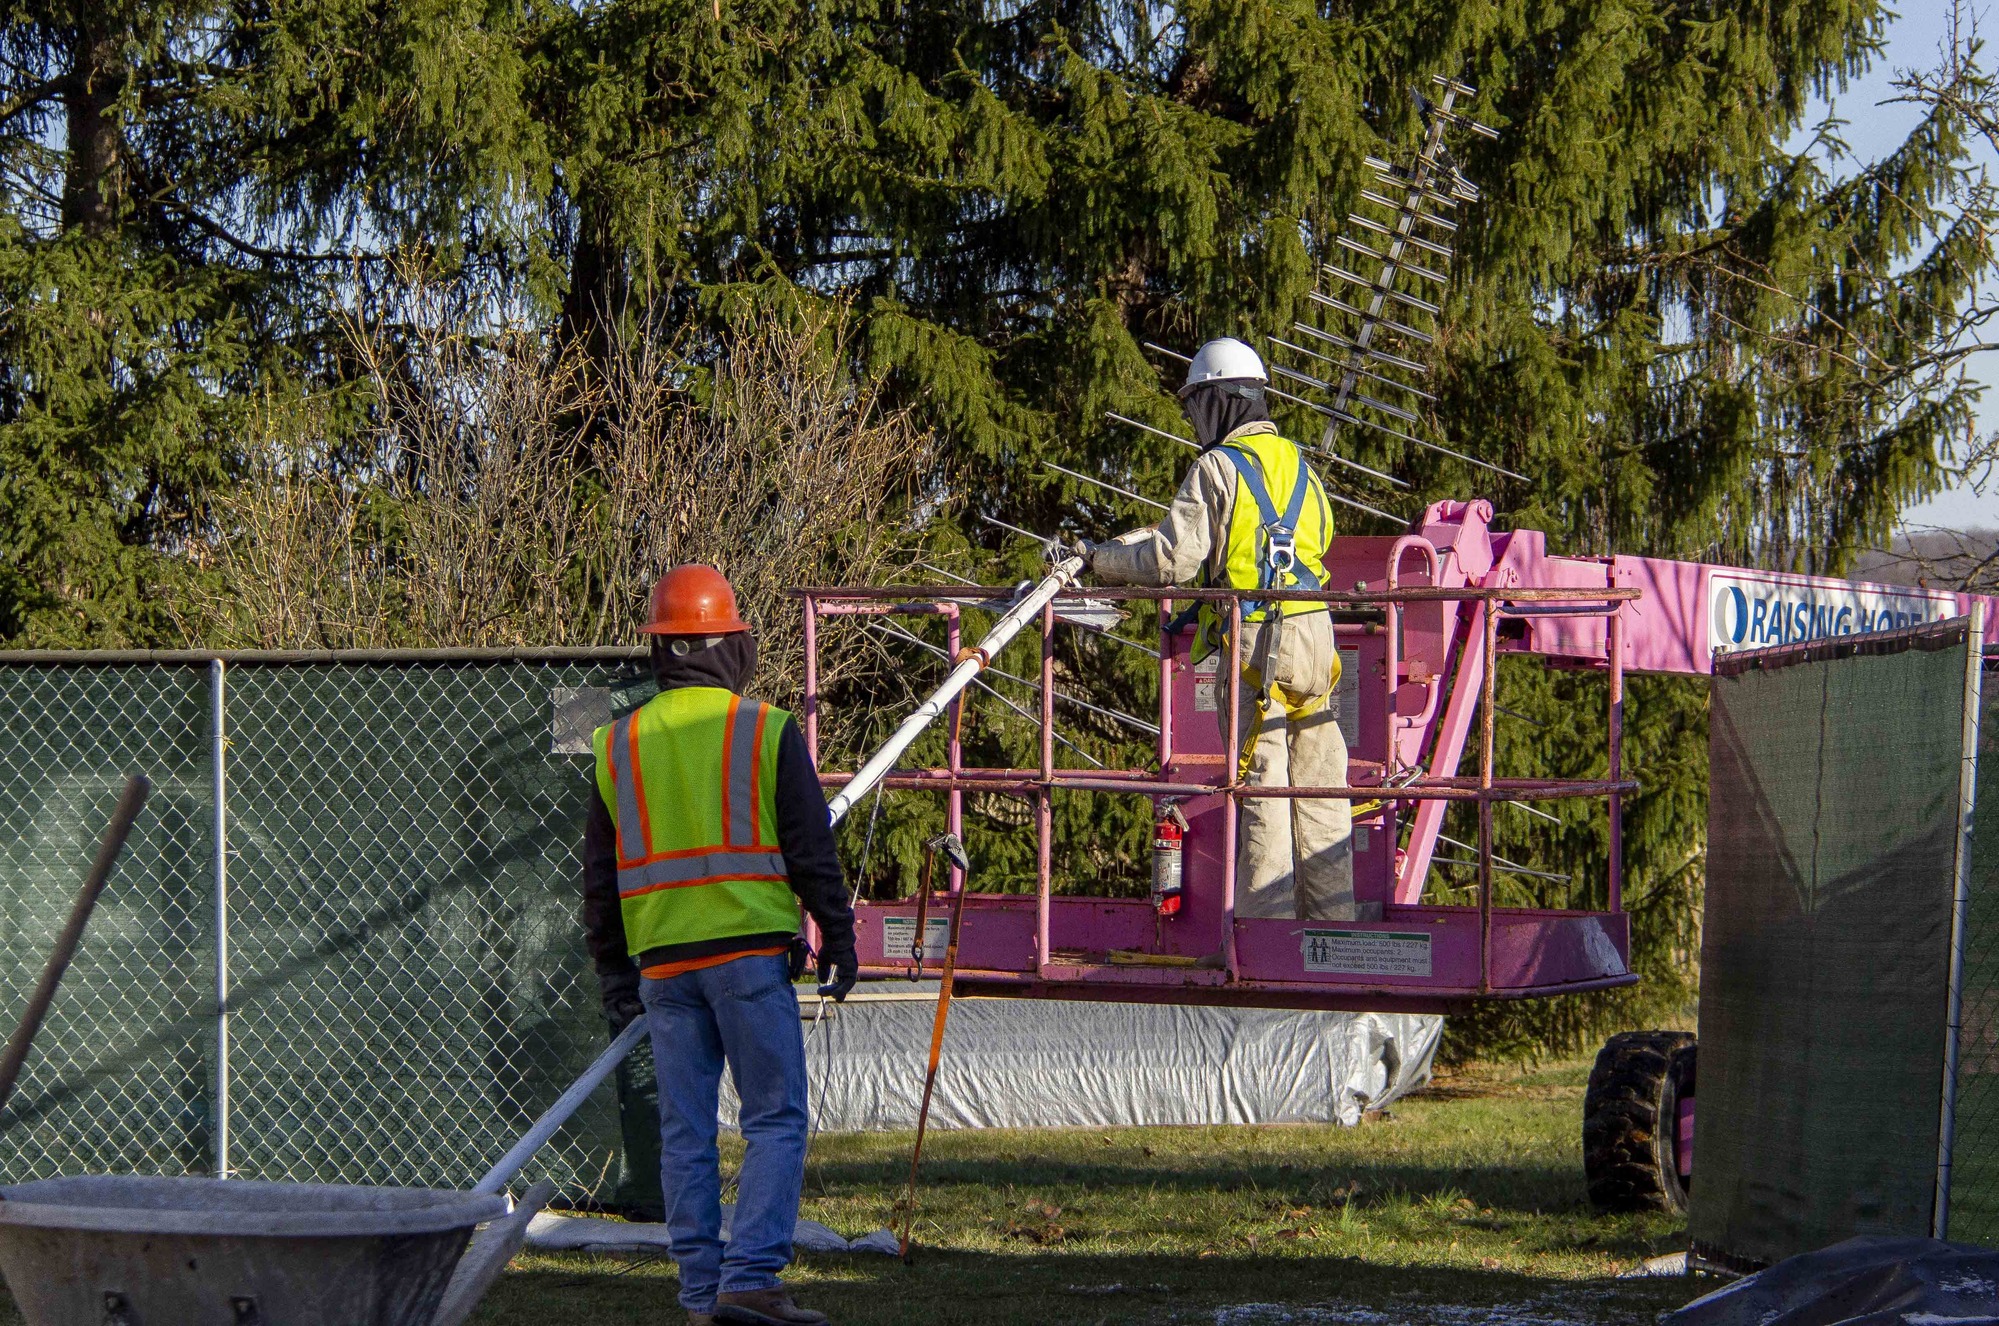 Two construction workers continue the process of removing the old TV antenna from the side of the house. The worker navigating the antenna down in the pink lift is almost at ground level with the second worker. 